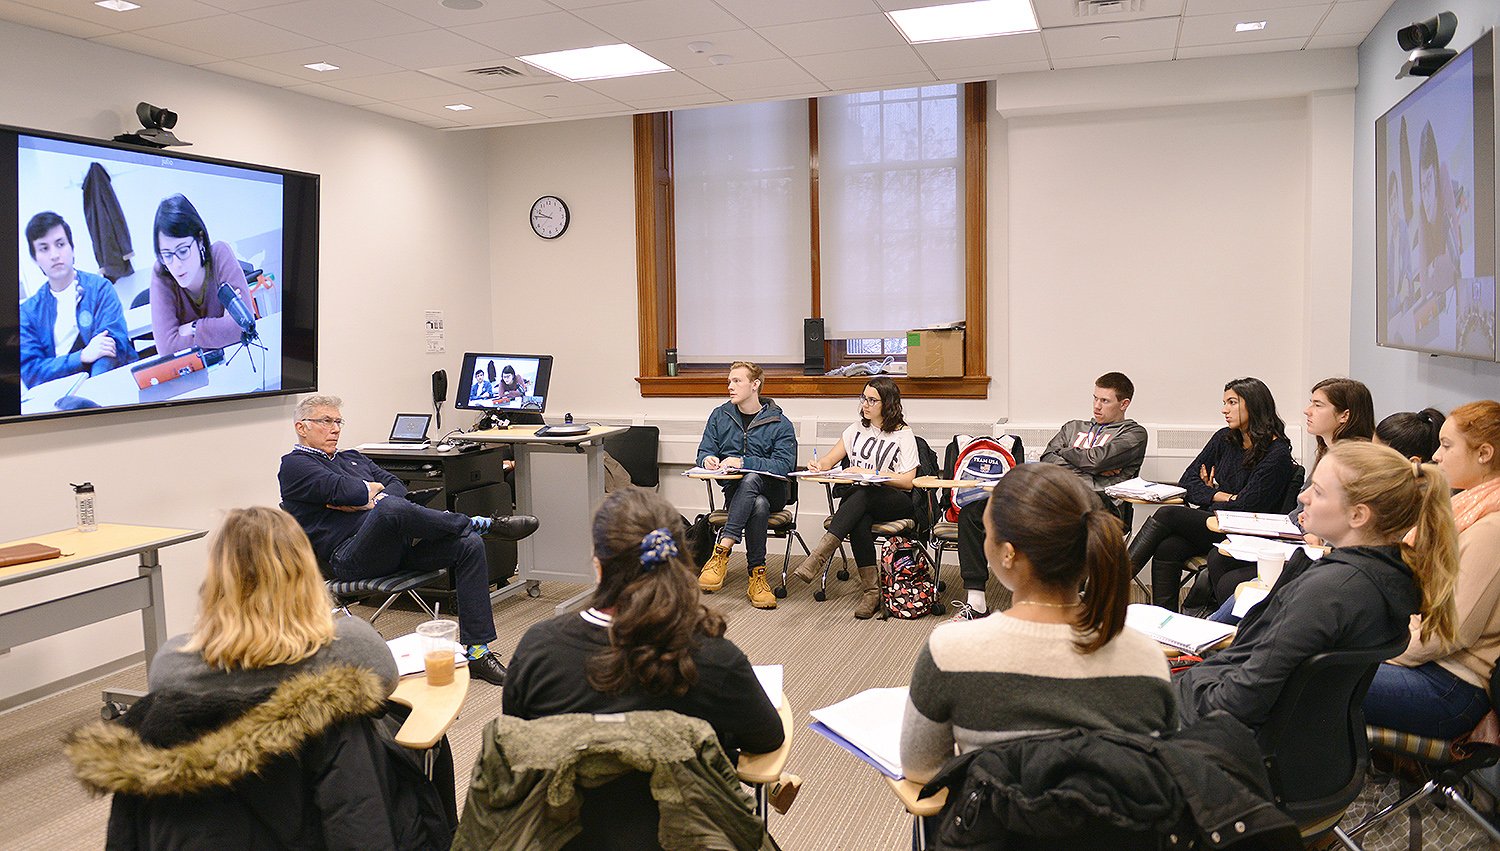 On March 28, the Spanish 258 class, taught by Antonio Gonzalez, professor of Spanish, interacted with a class at at Charles III University in Madrid, Spain over videoconferencing. (Photos by Olivia Drake) 